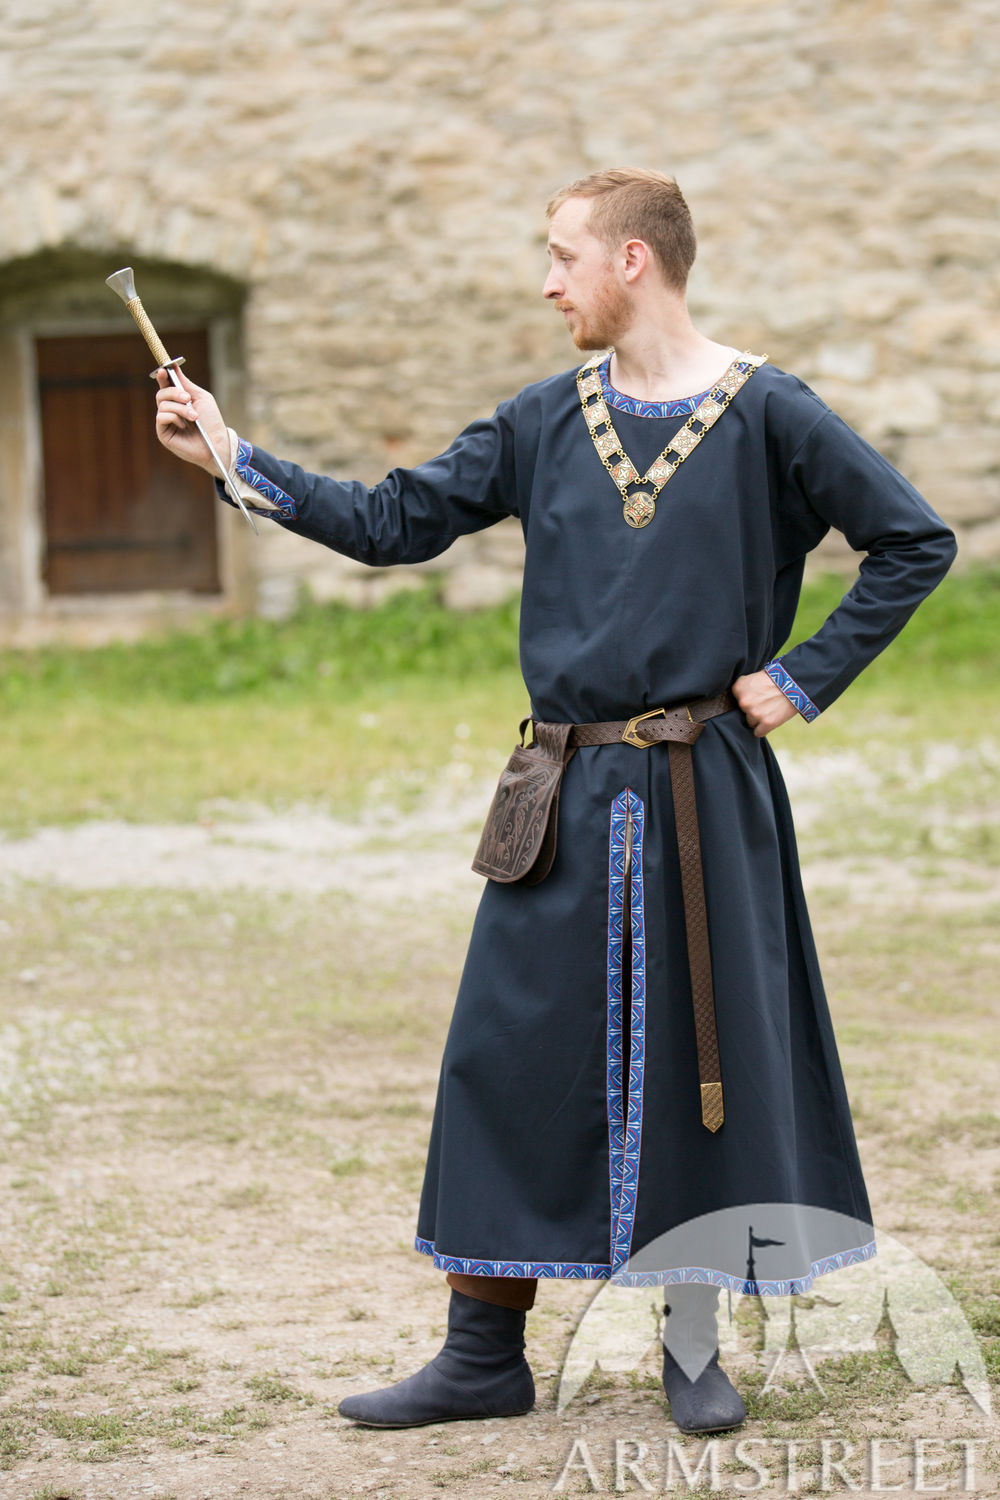 Long trimmed cotton tunic “Prince Gilderoy” inspired by XIII century